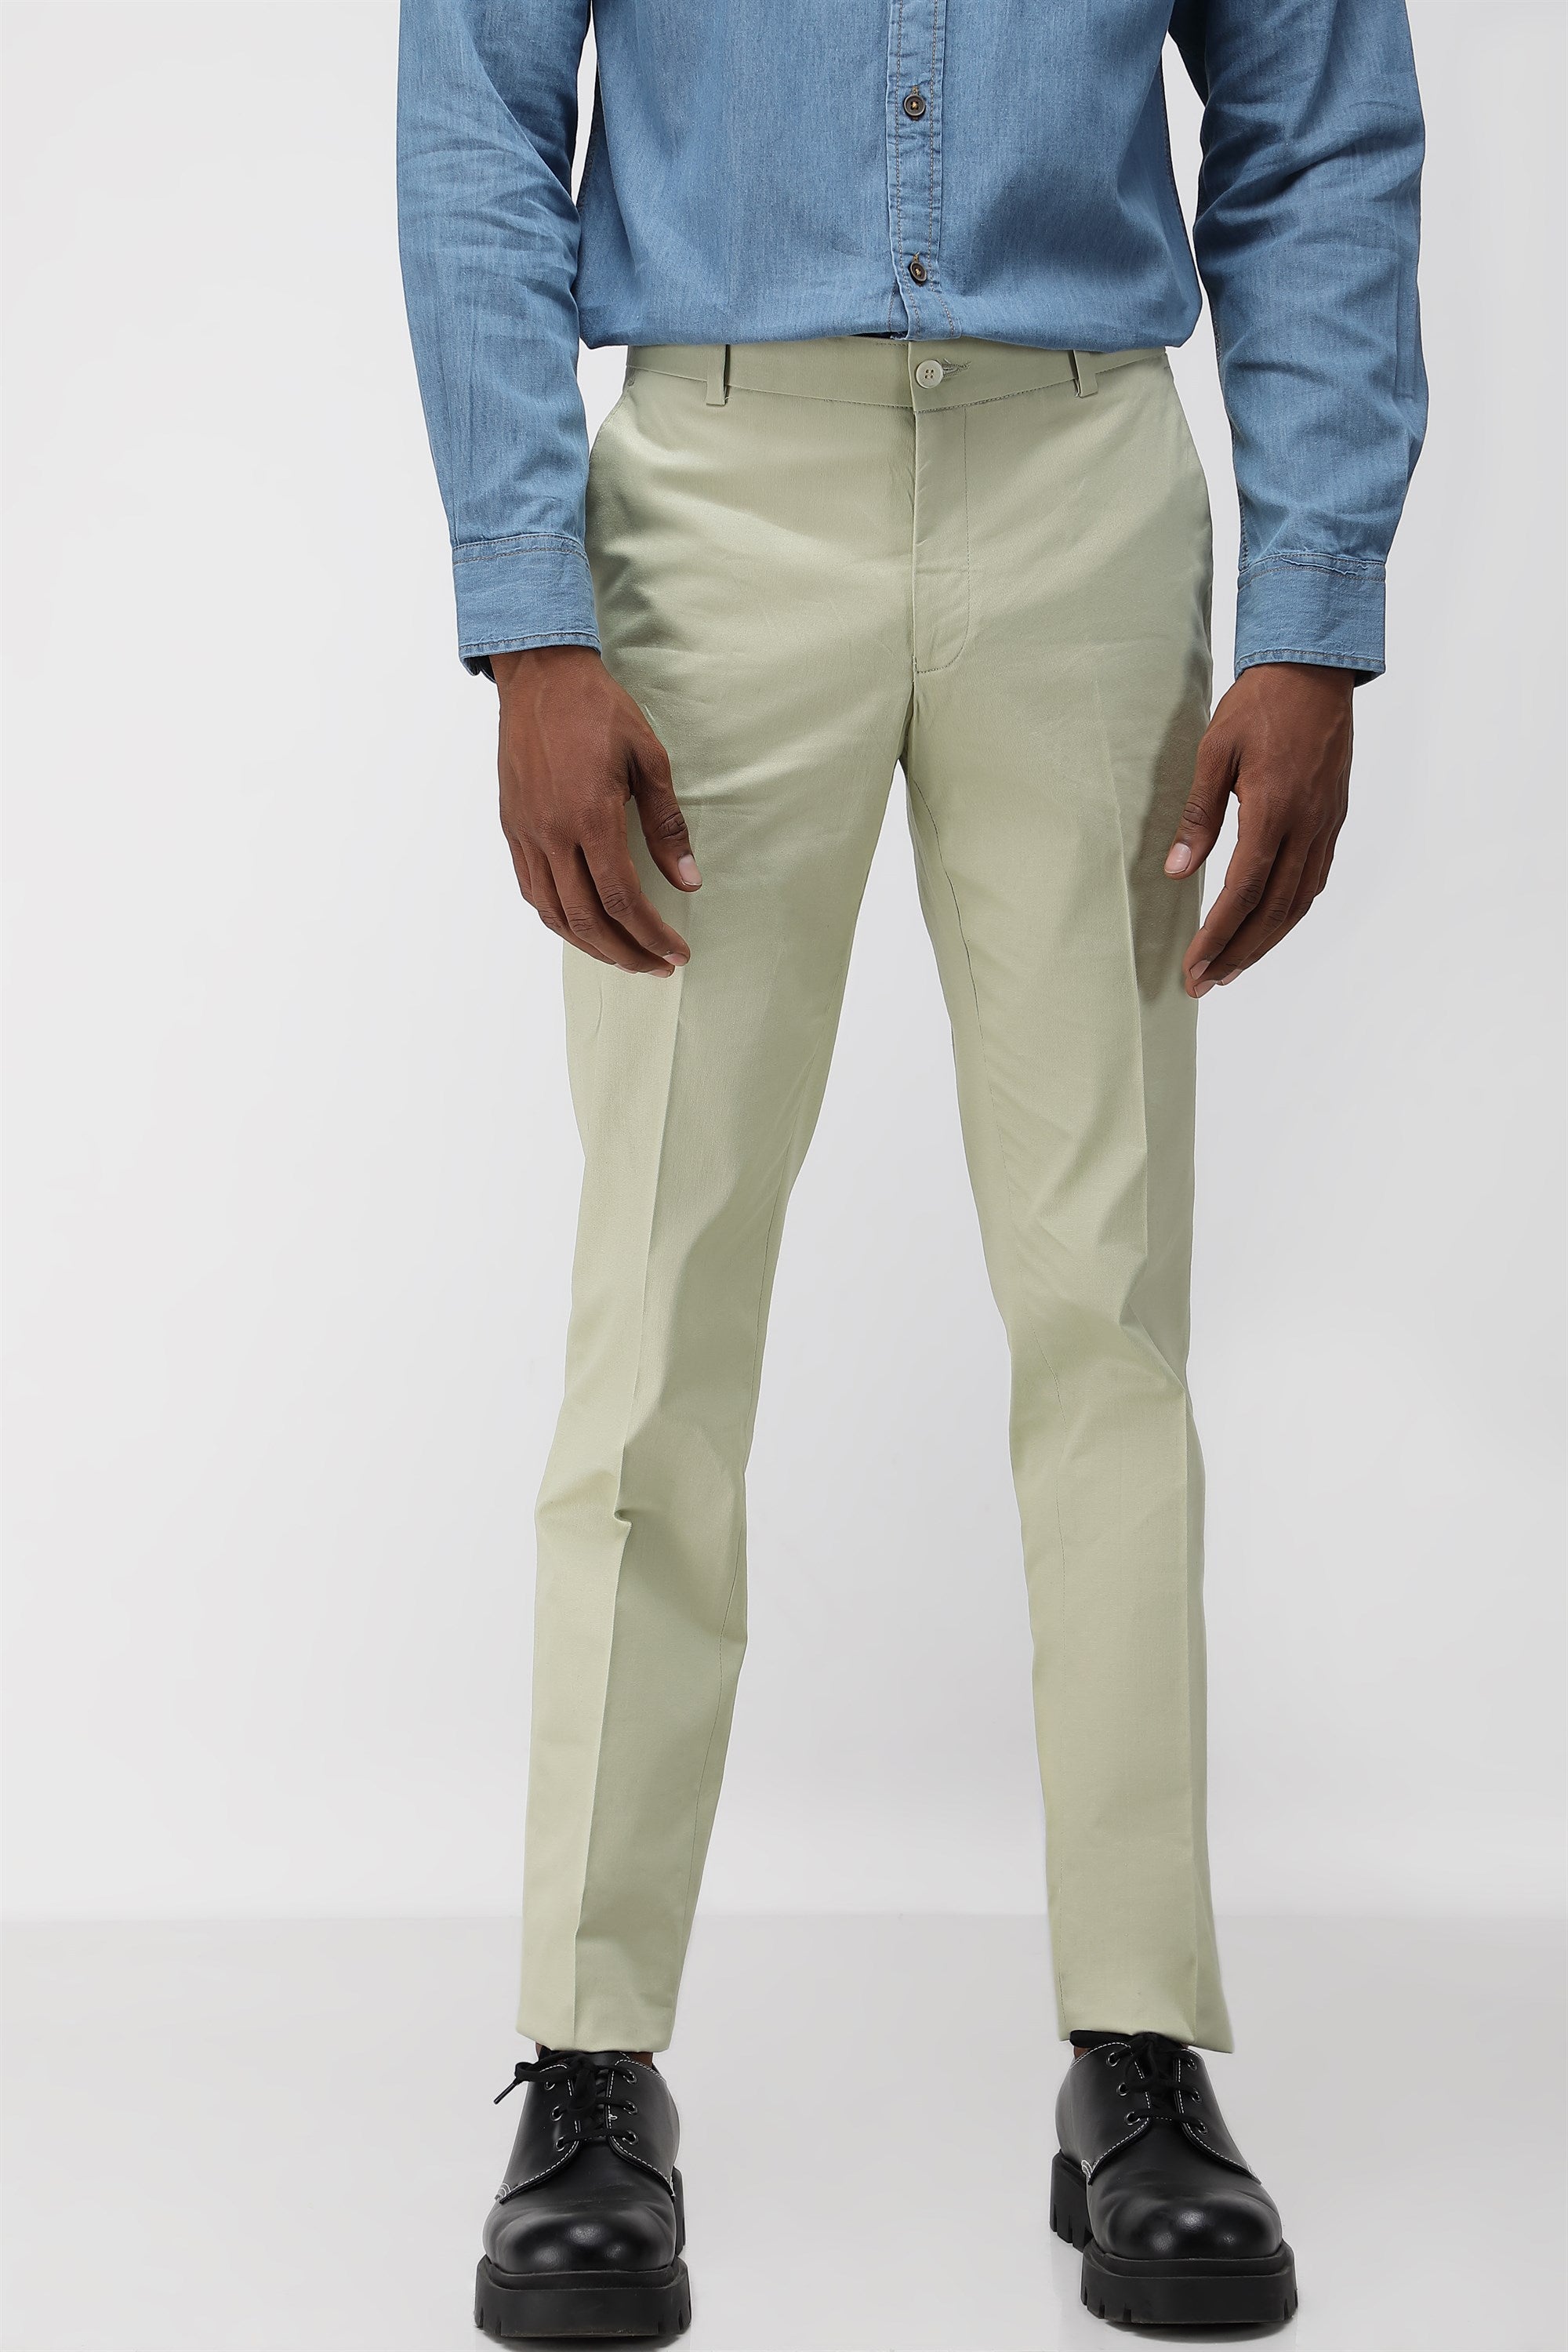 Bare Brown Stretch Slim Fit Cotton Trousers  Light Grey  Tea  Tailoring